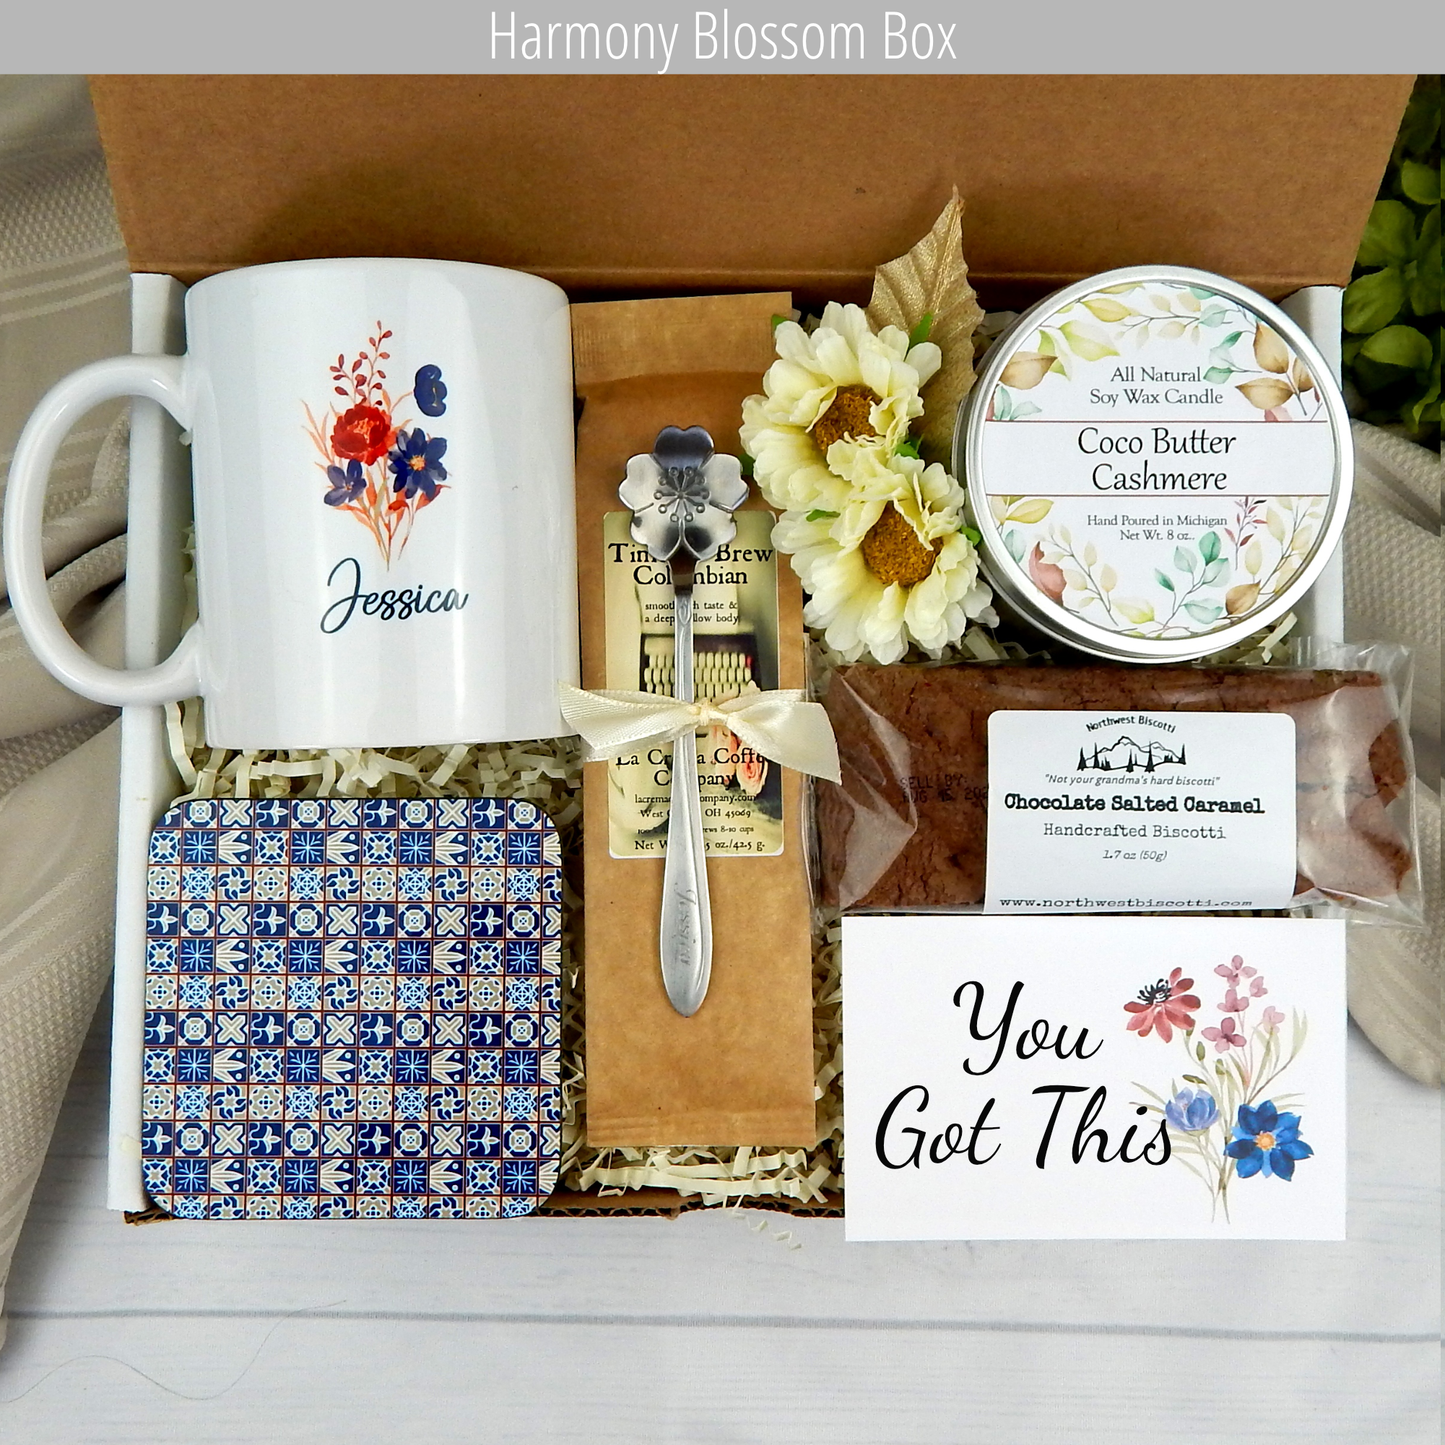 Care package with message of encouragement with personalized mug